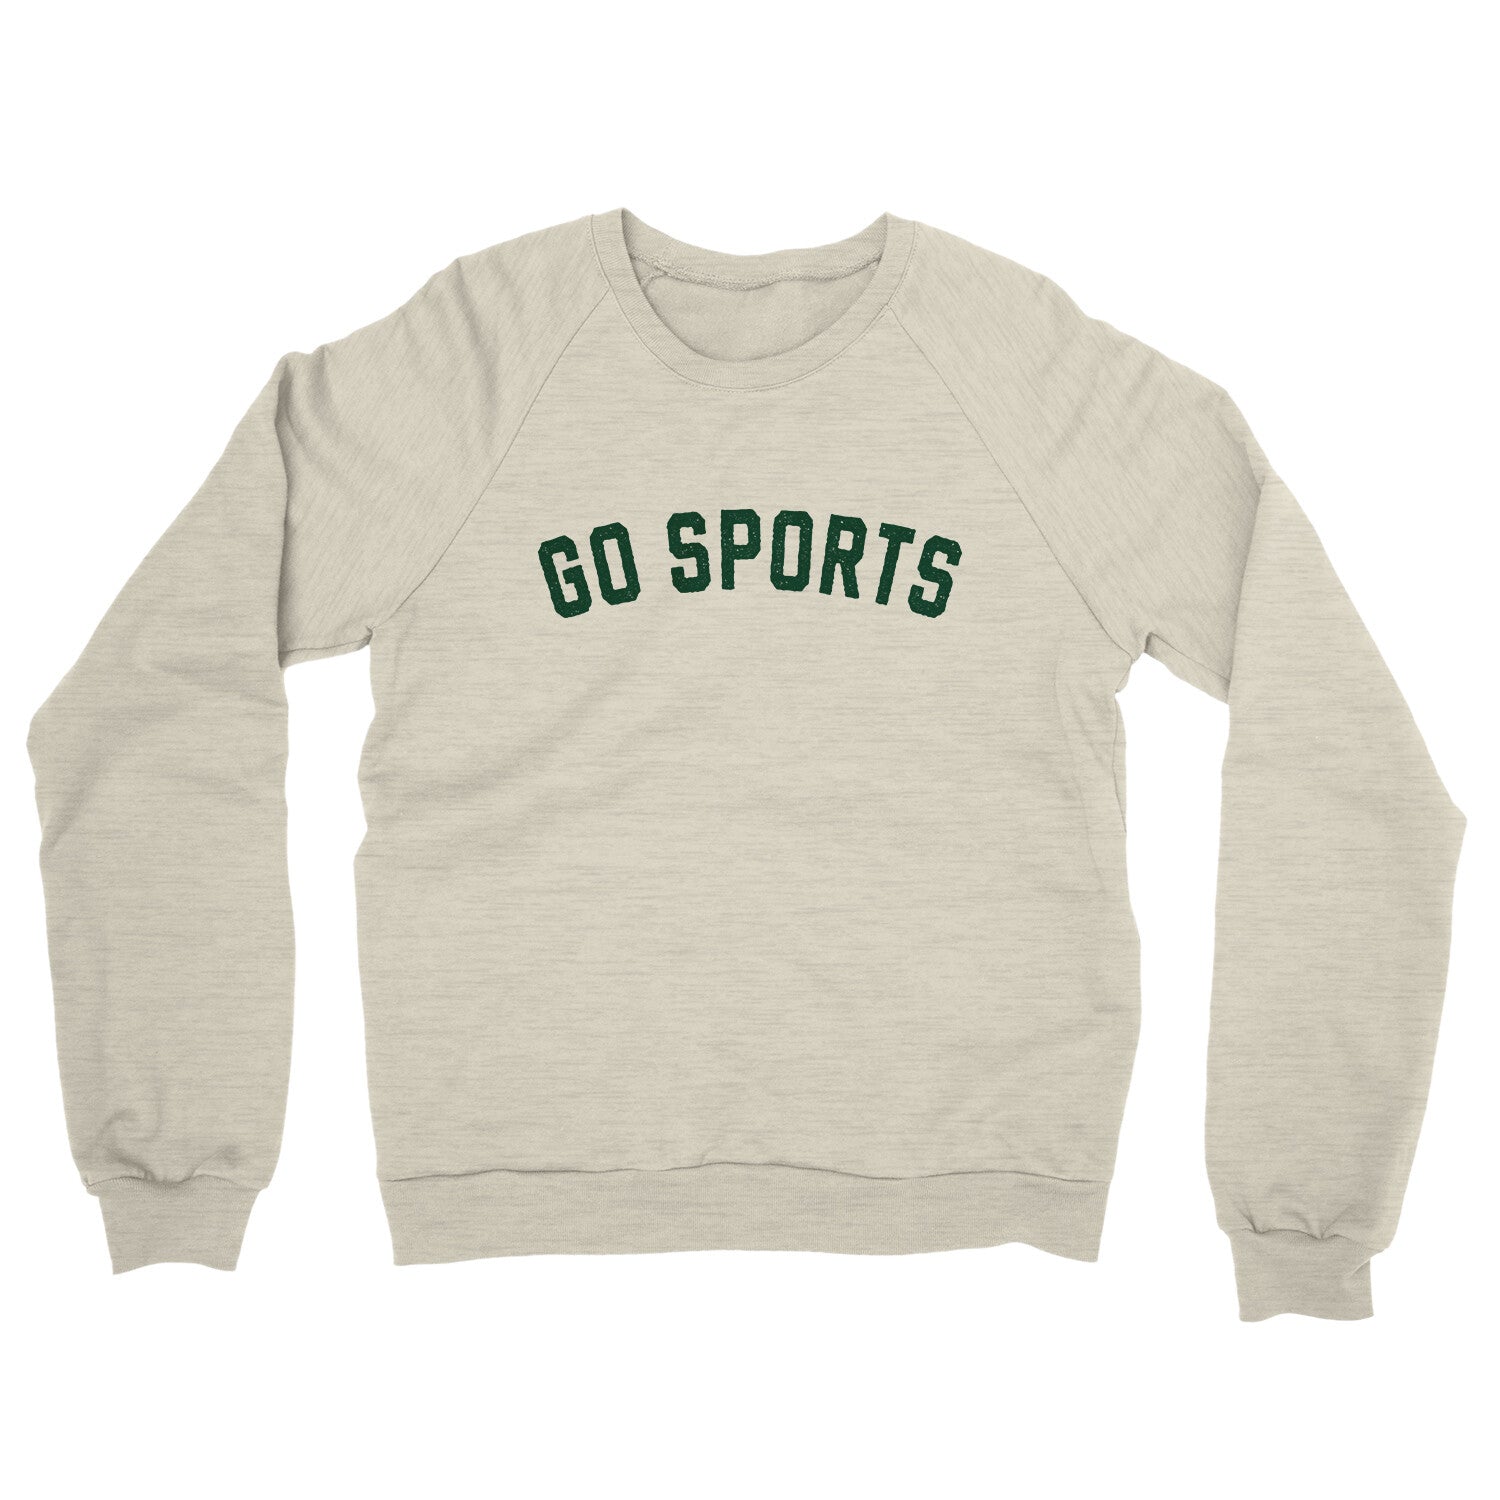 Go Sports in Heather Oatmeal Color